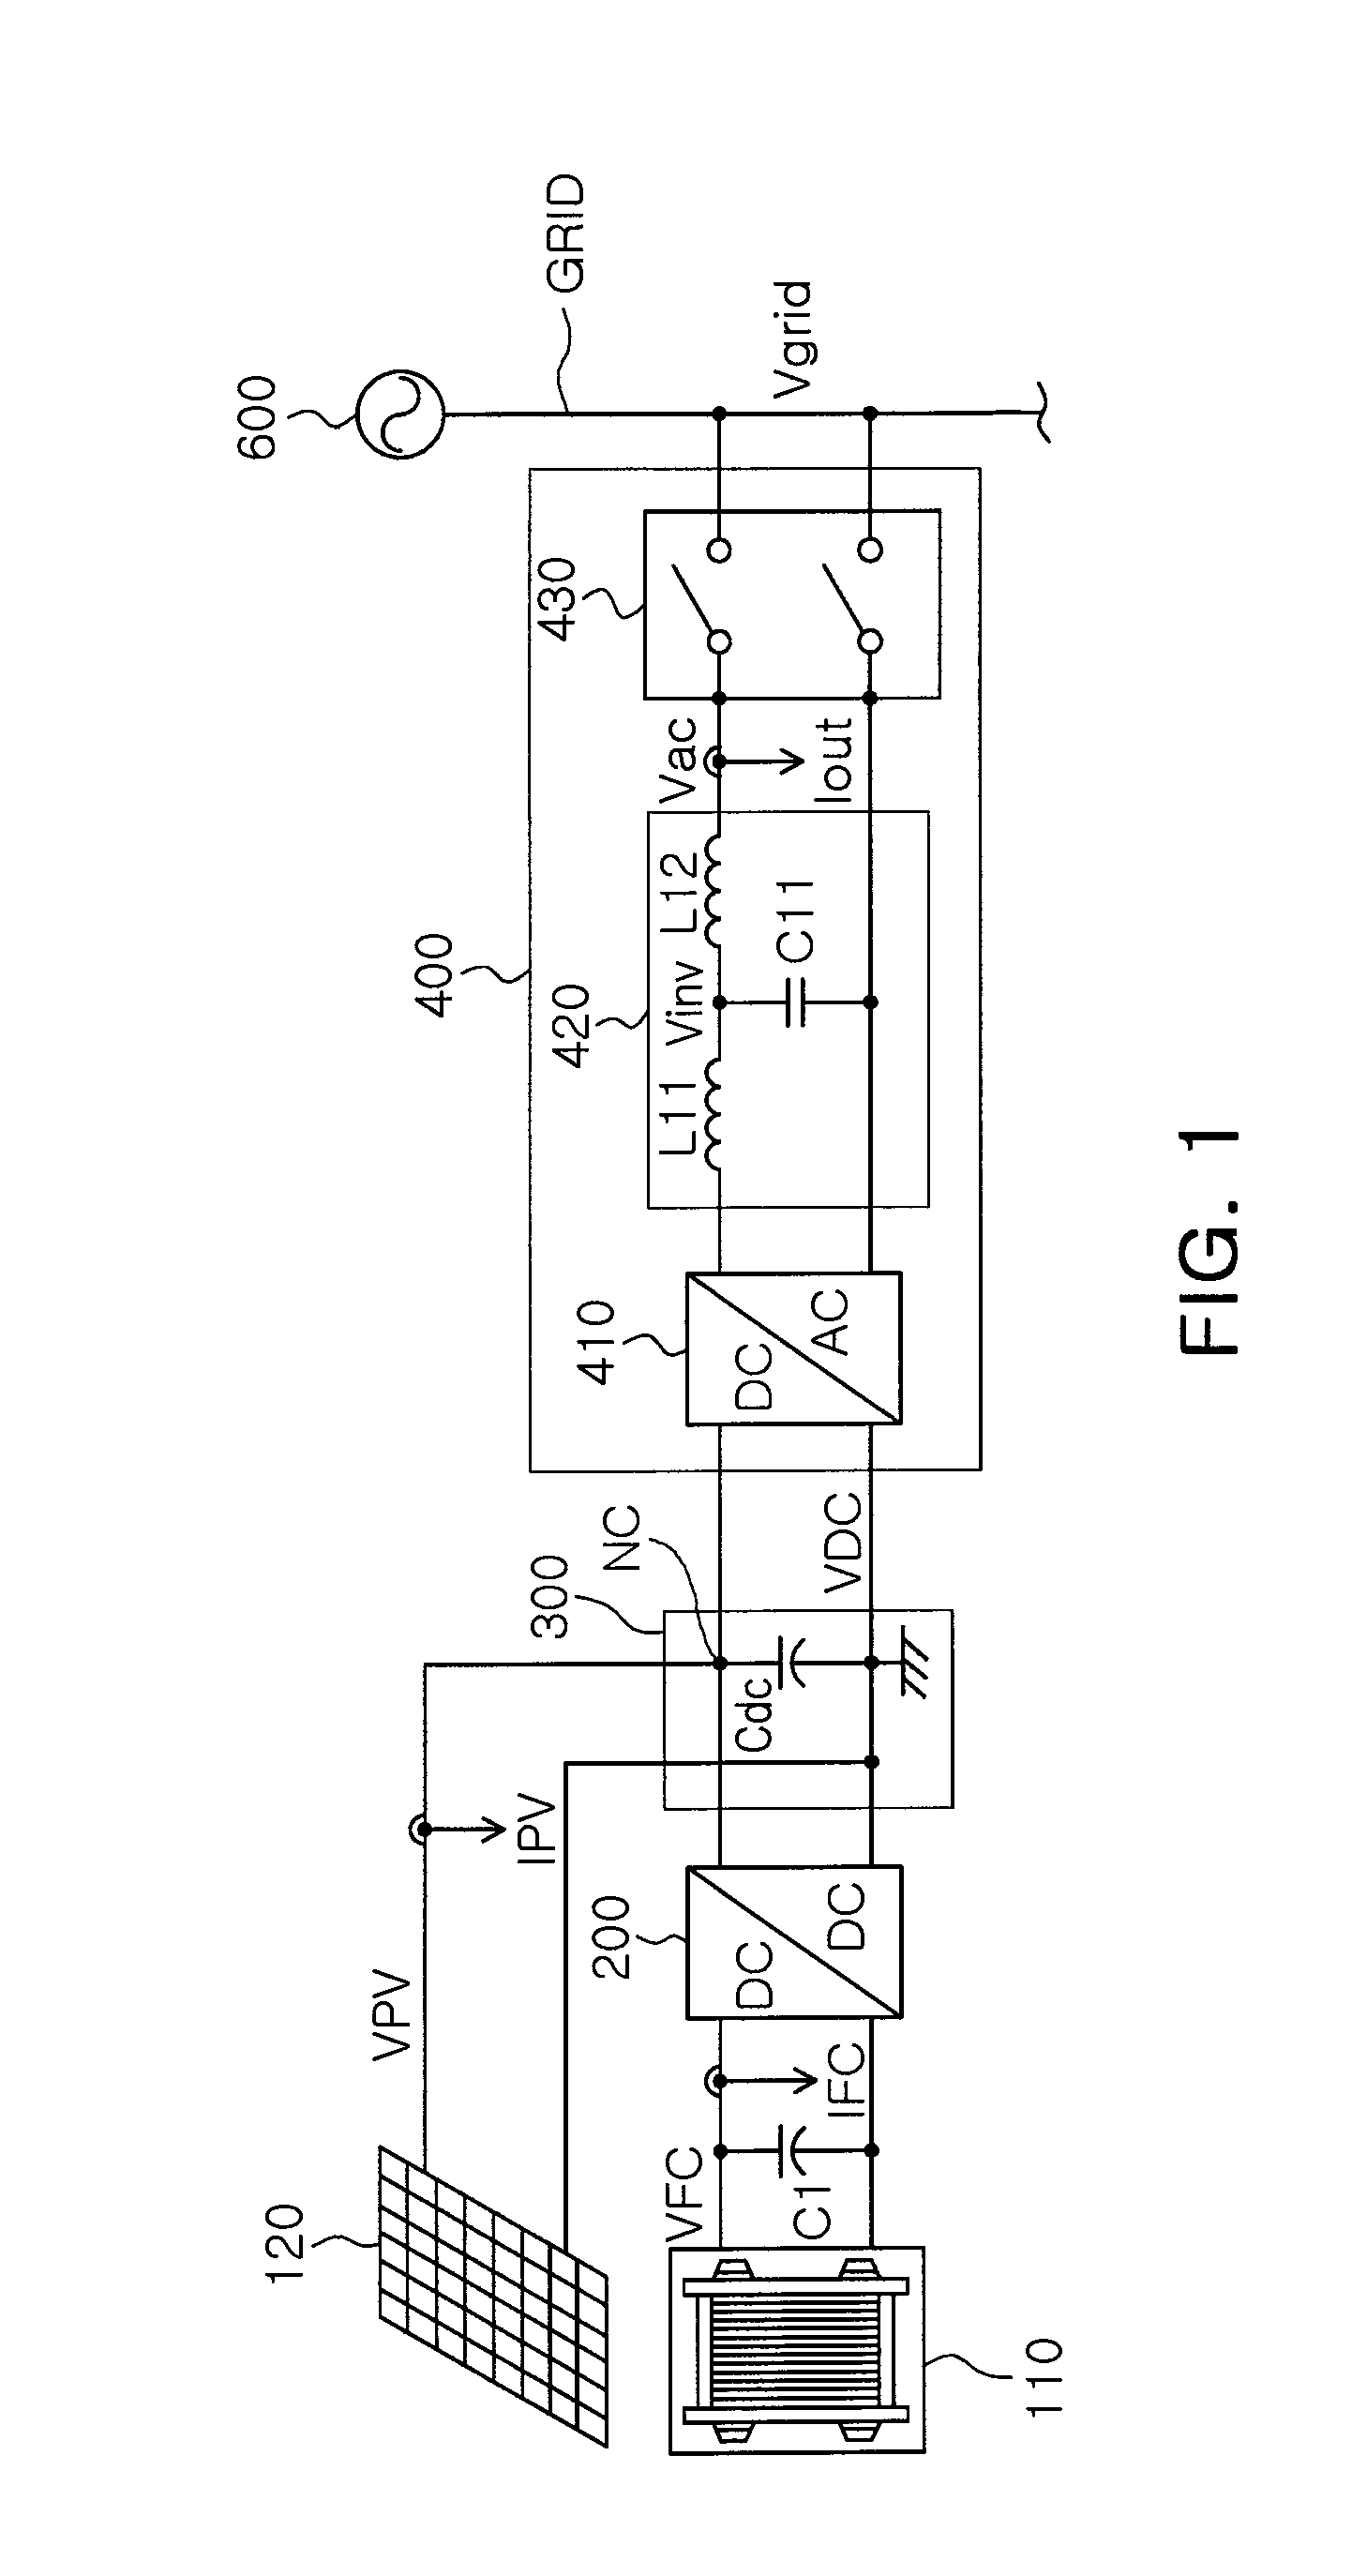 Photovoltaic and fuel cell hybrid generation system using single converter and single inverter, and method of controlling the same